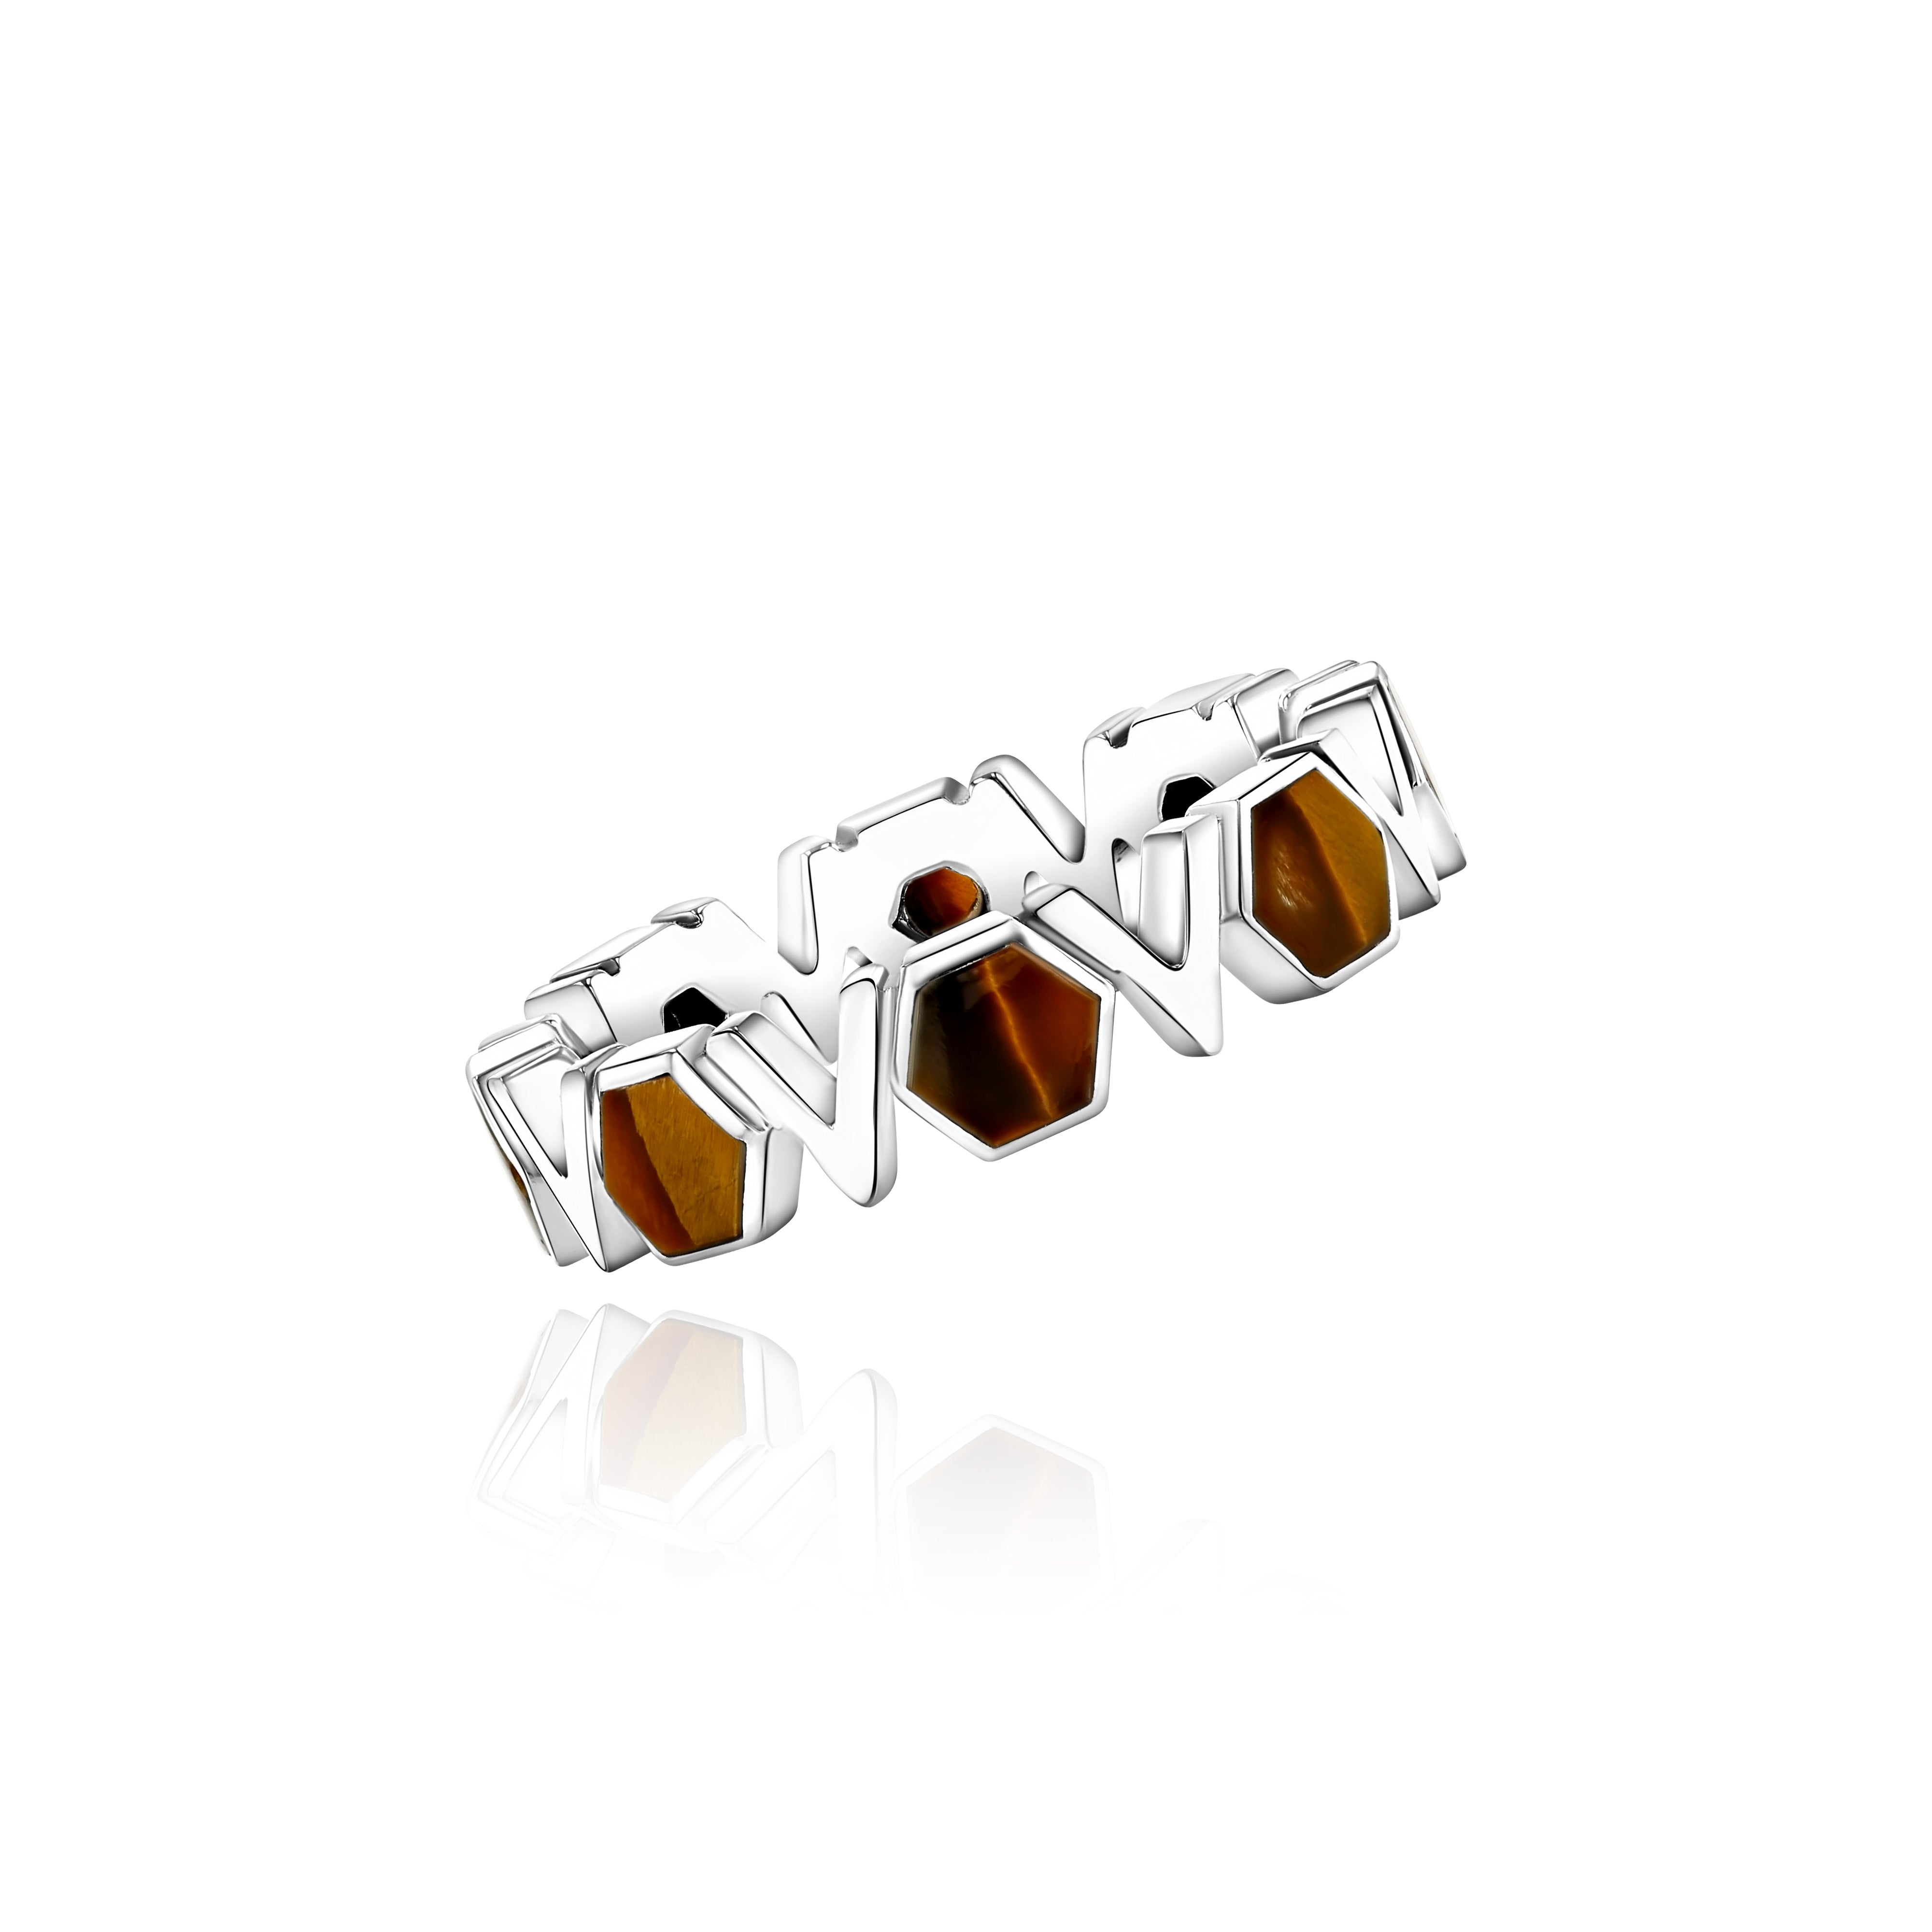 Silver Band with repeating Tiger's Eye octagons and V shapes, Medium